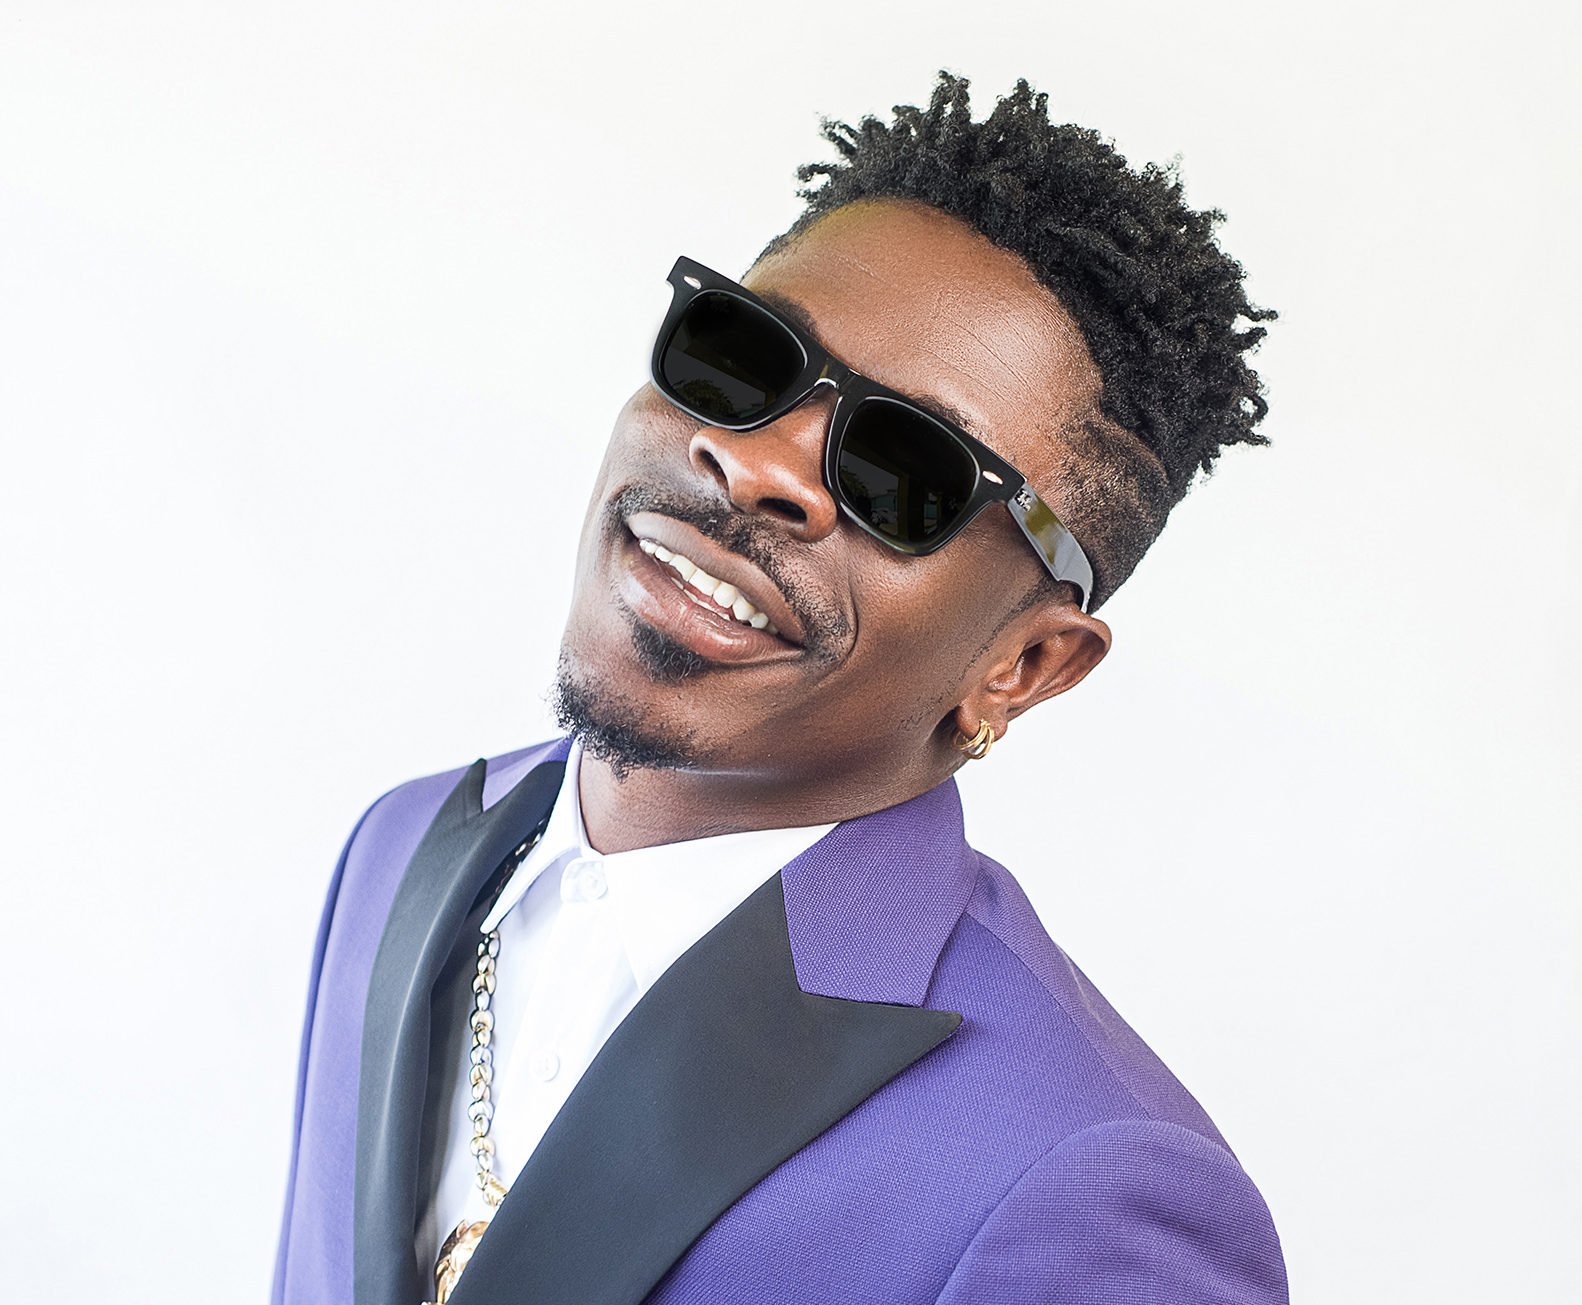 Shatta Wale Expresses Desire To Visit The White House